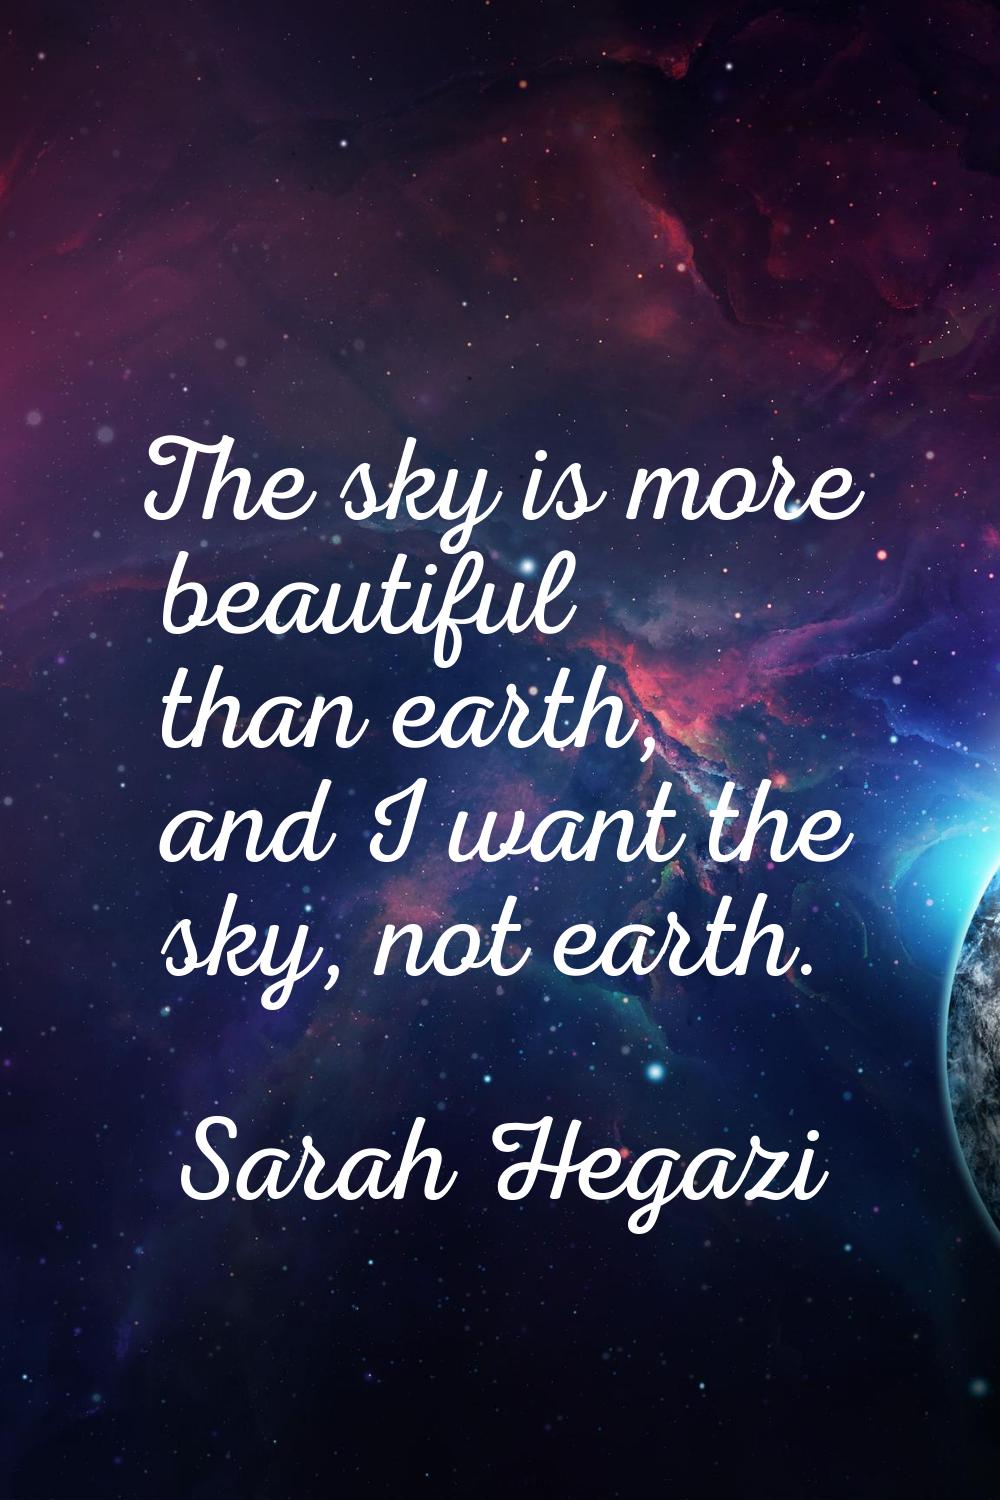 The sky is more beautiful than earth, and I want the sky, not earth.